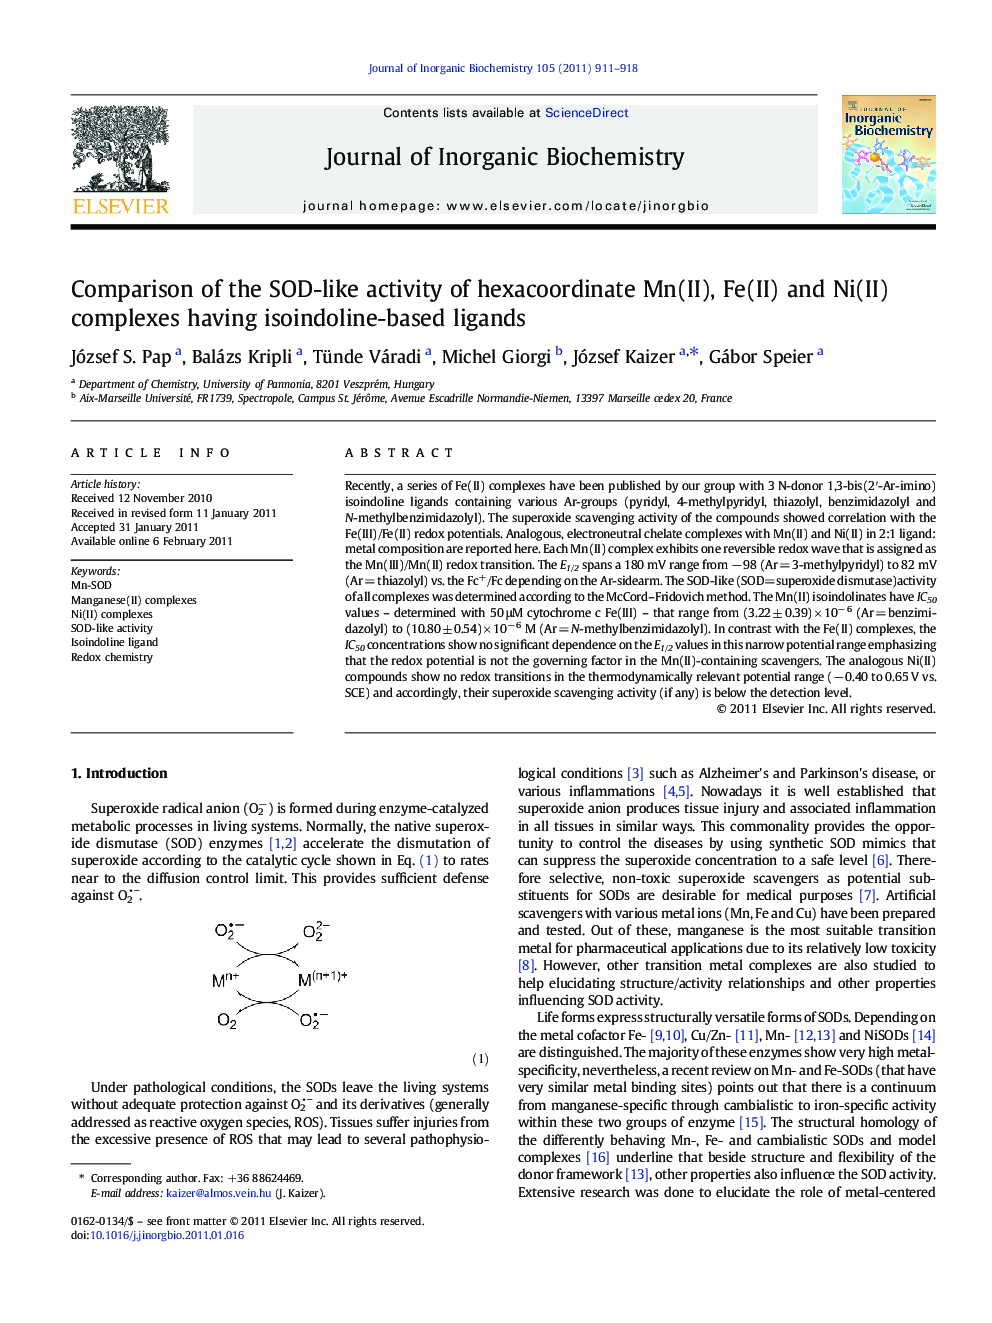 Comparison of the SOD-like activity of hexacoordinate Mn(II), Fe(II) and Ni(II) complexes having isoindoline-based ligands